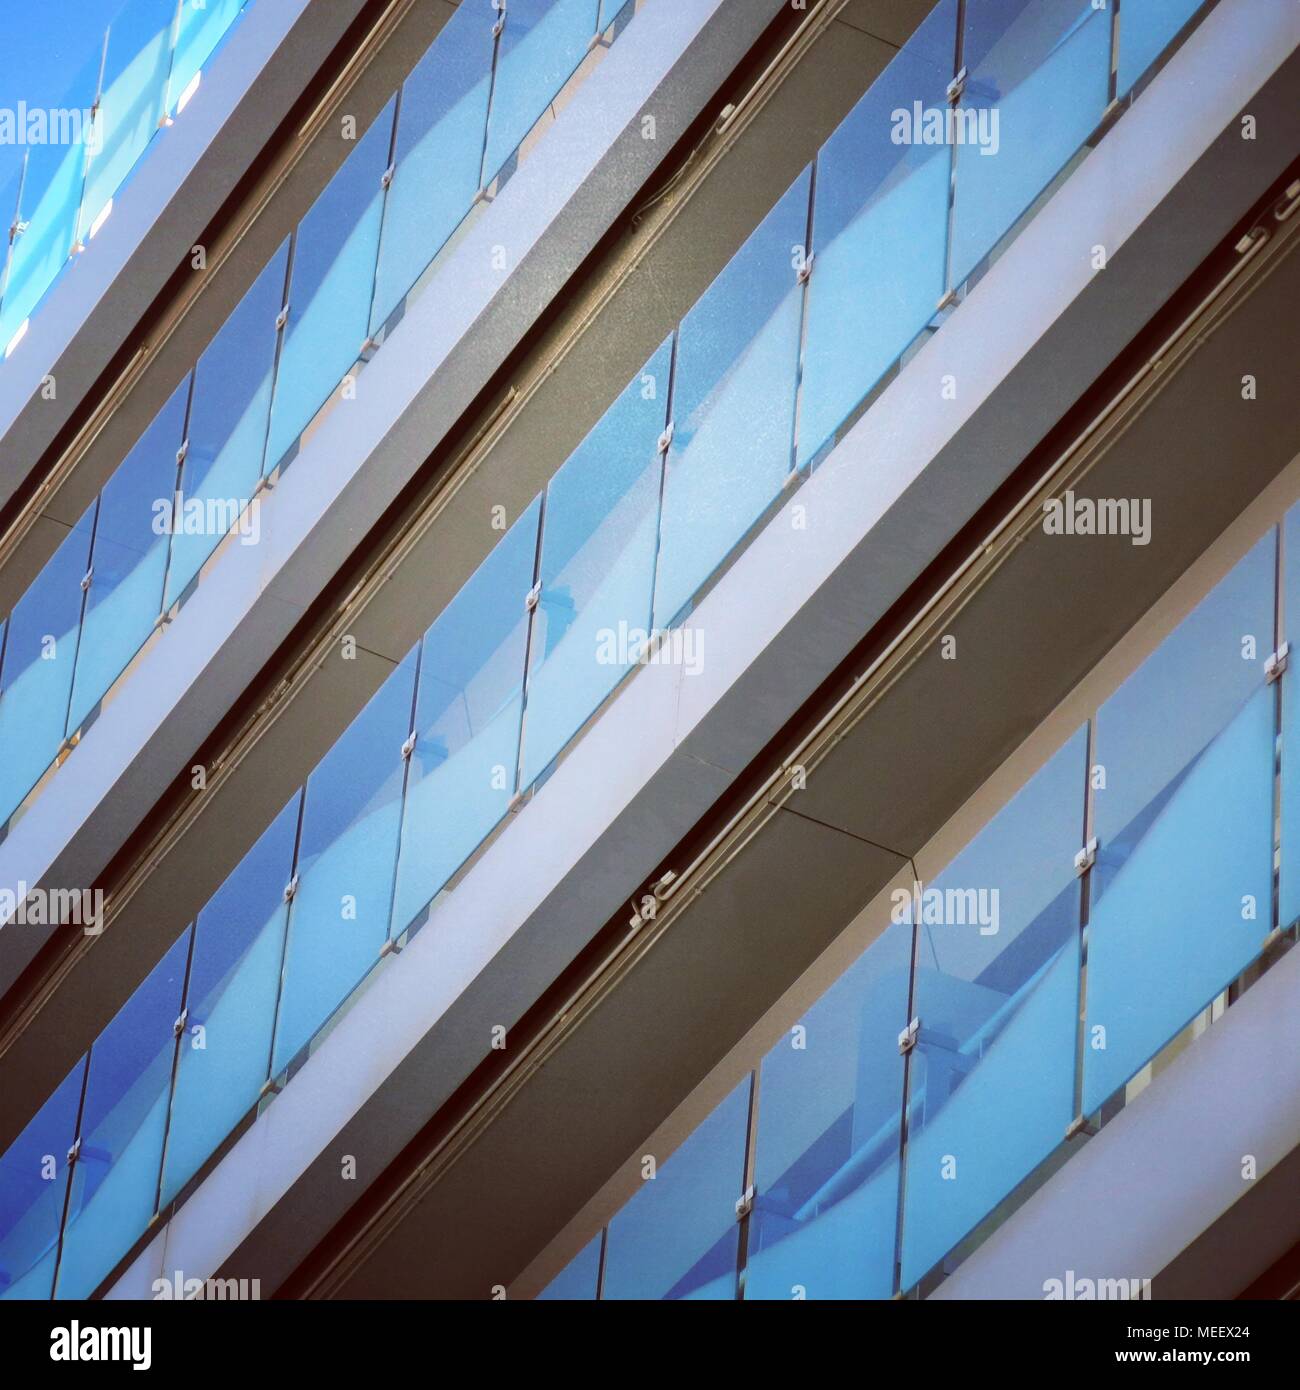 Blue repetitive pattern on balconies. Stock Photo